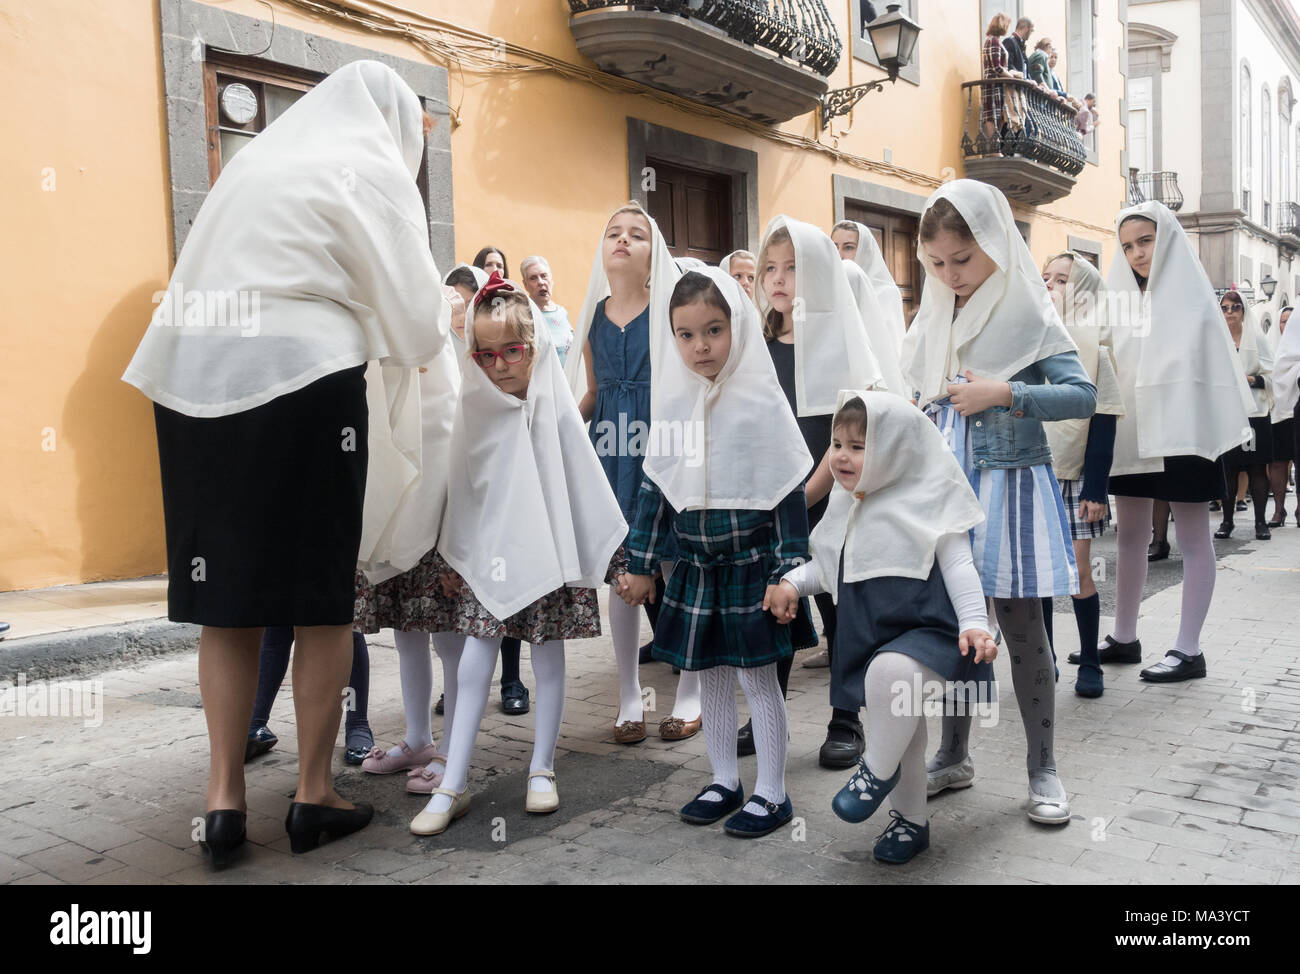 Las Palmas, Gran Canaria, Canary Islands, Spain. 30th March, 2018. Viernes Santo (Holy Friday) procession in the streets around Las Palmas cathedral on Gran Canaria. Credit: ALAN DAWSON/Alamy Live News Stock Photo